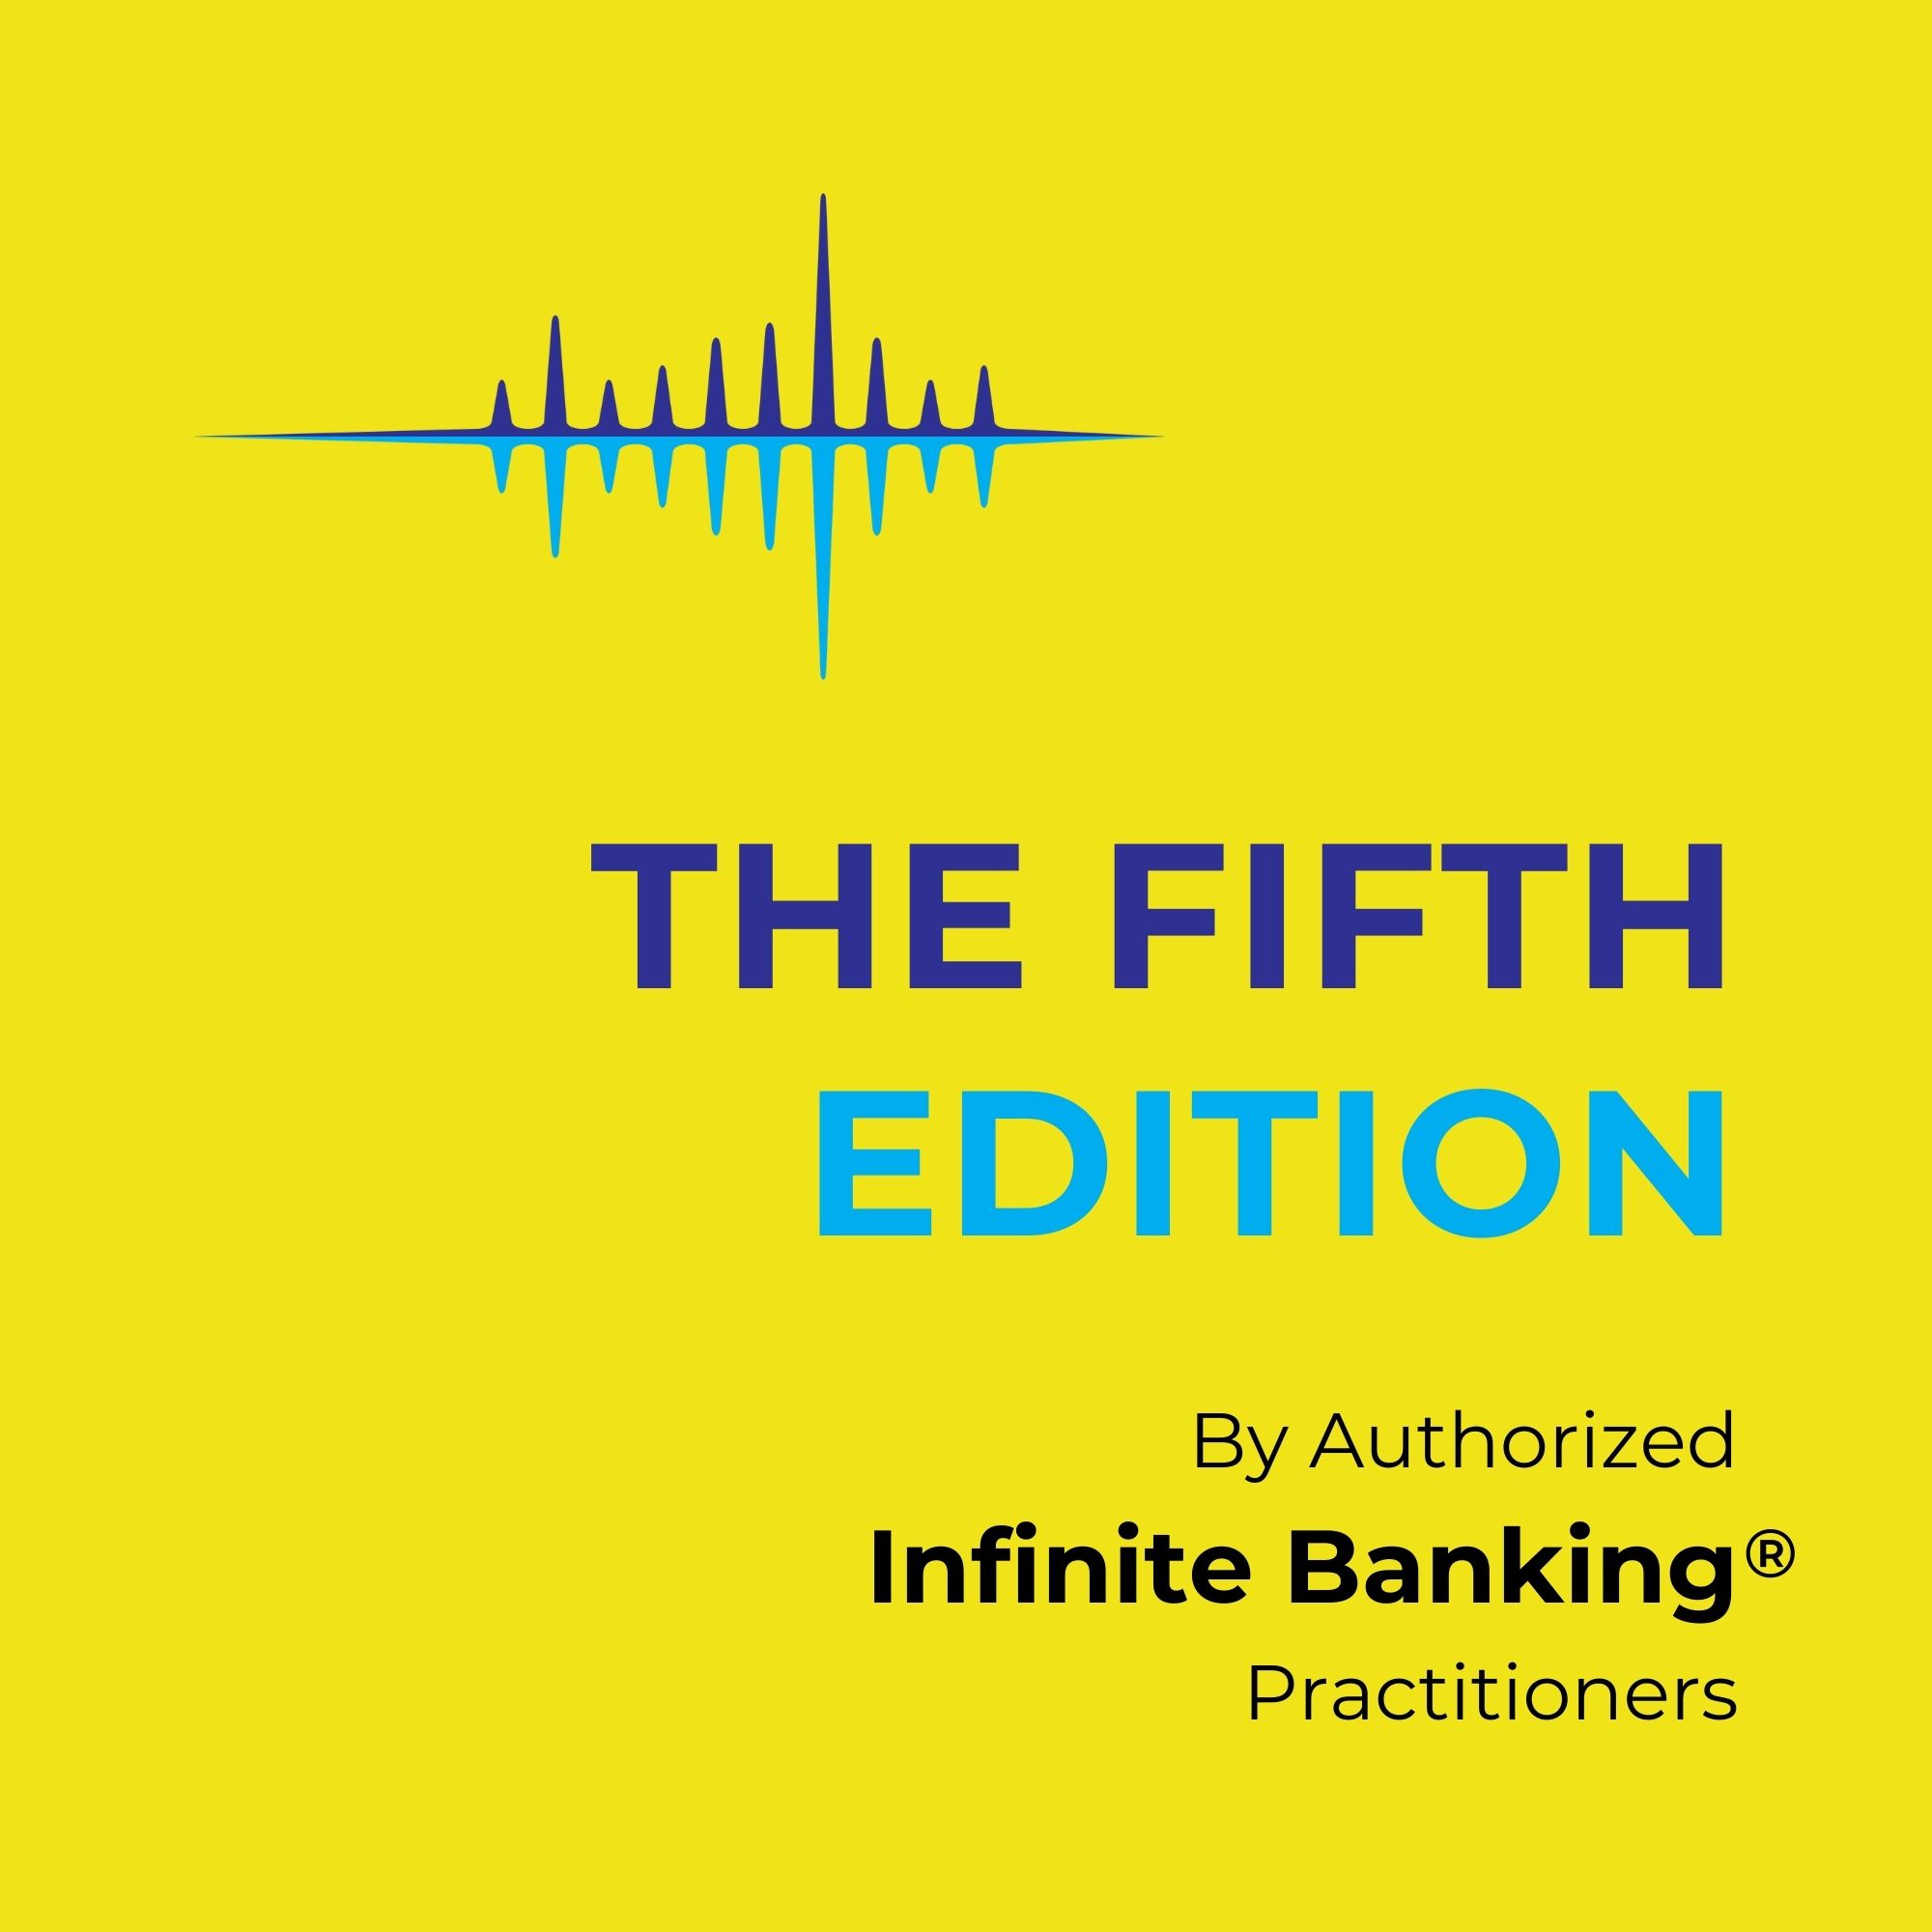 What is Infinite Banking? Image